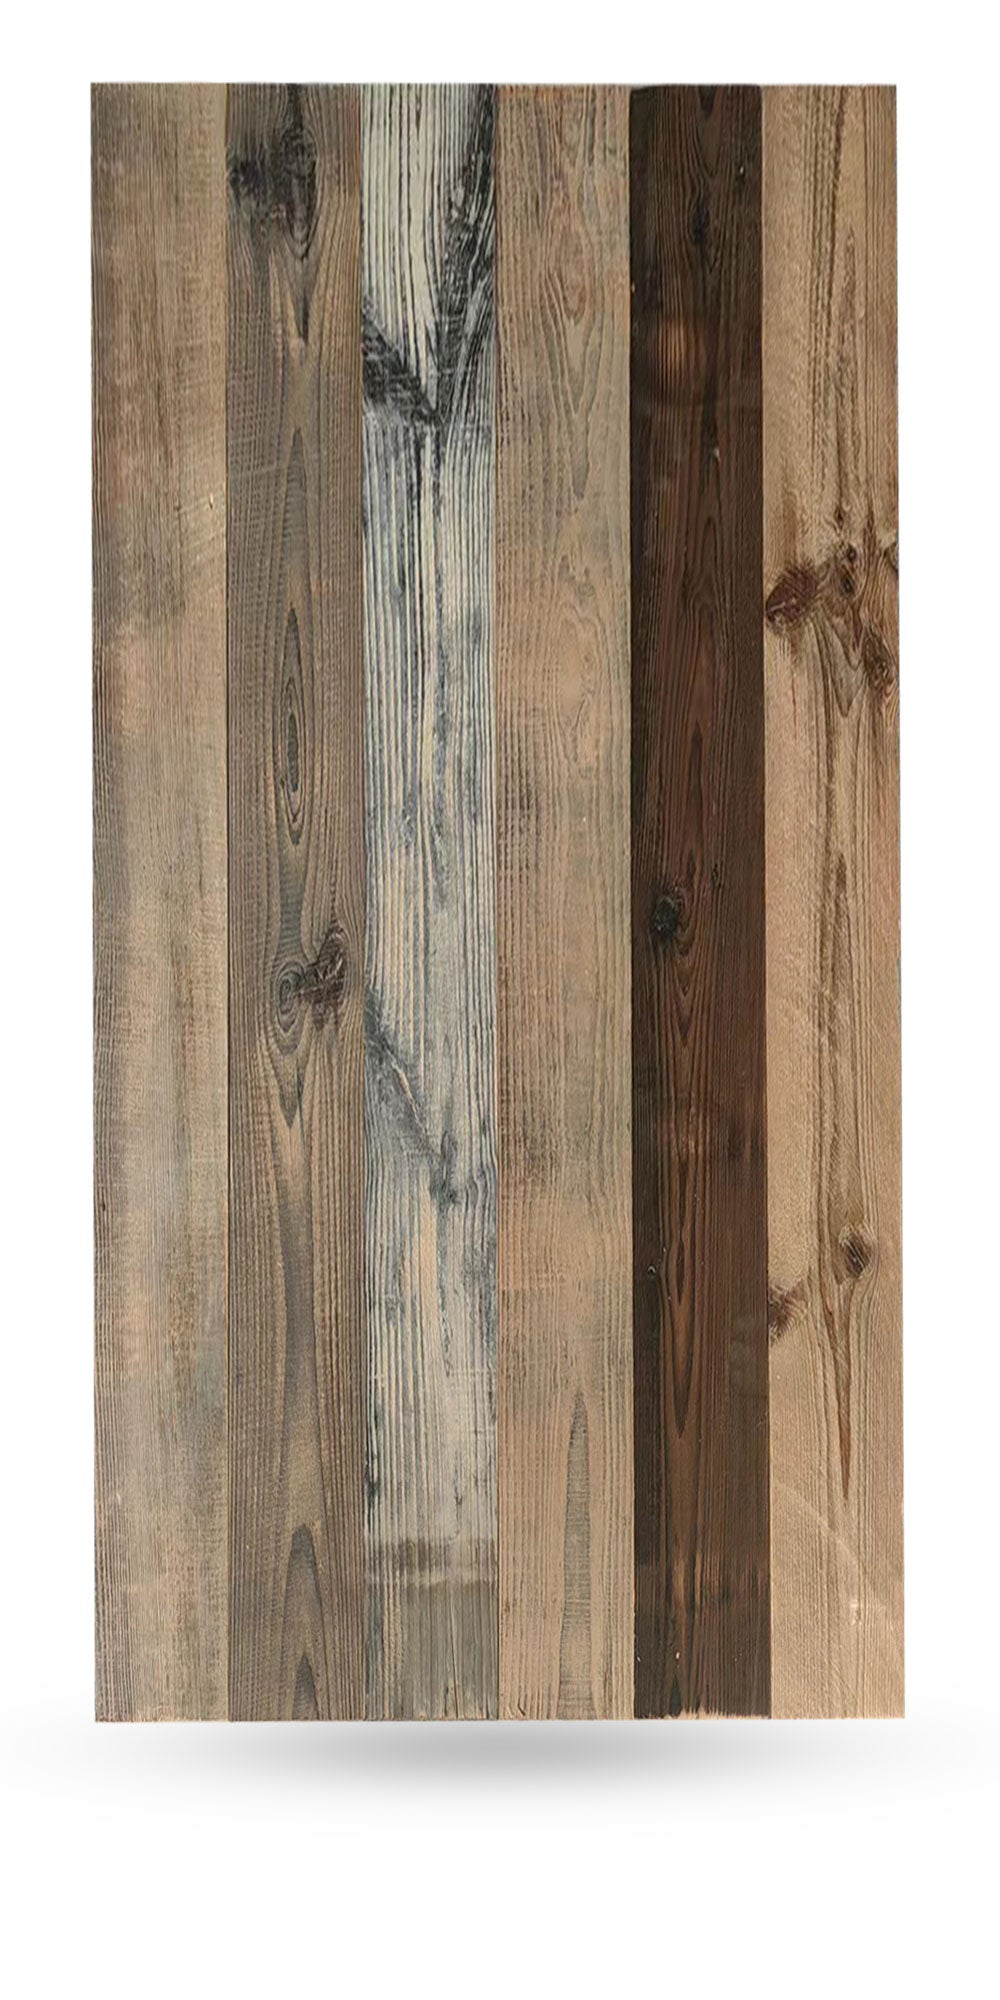 Style Selections Weathered Grey Pine Wood Shiplap Wall Plank Kit (Coverage Area: 10.5-sq ft) in Gray | 51005